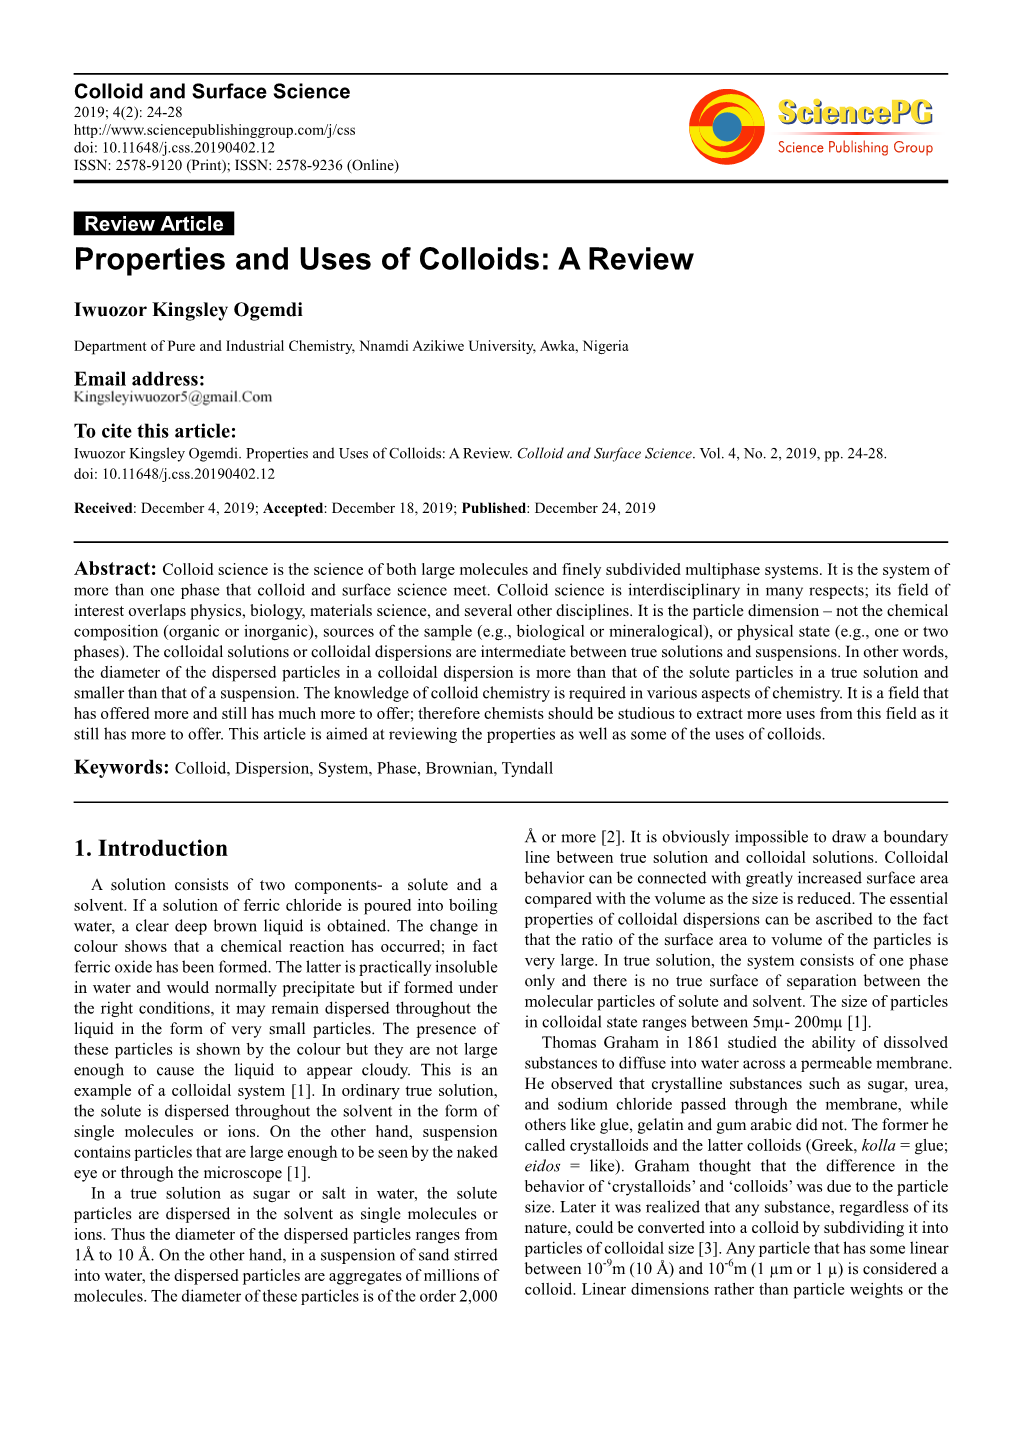 Properties and Uses of Colloids: a Review